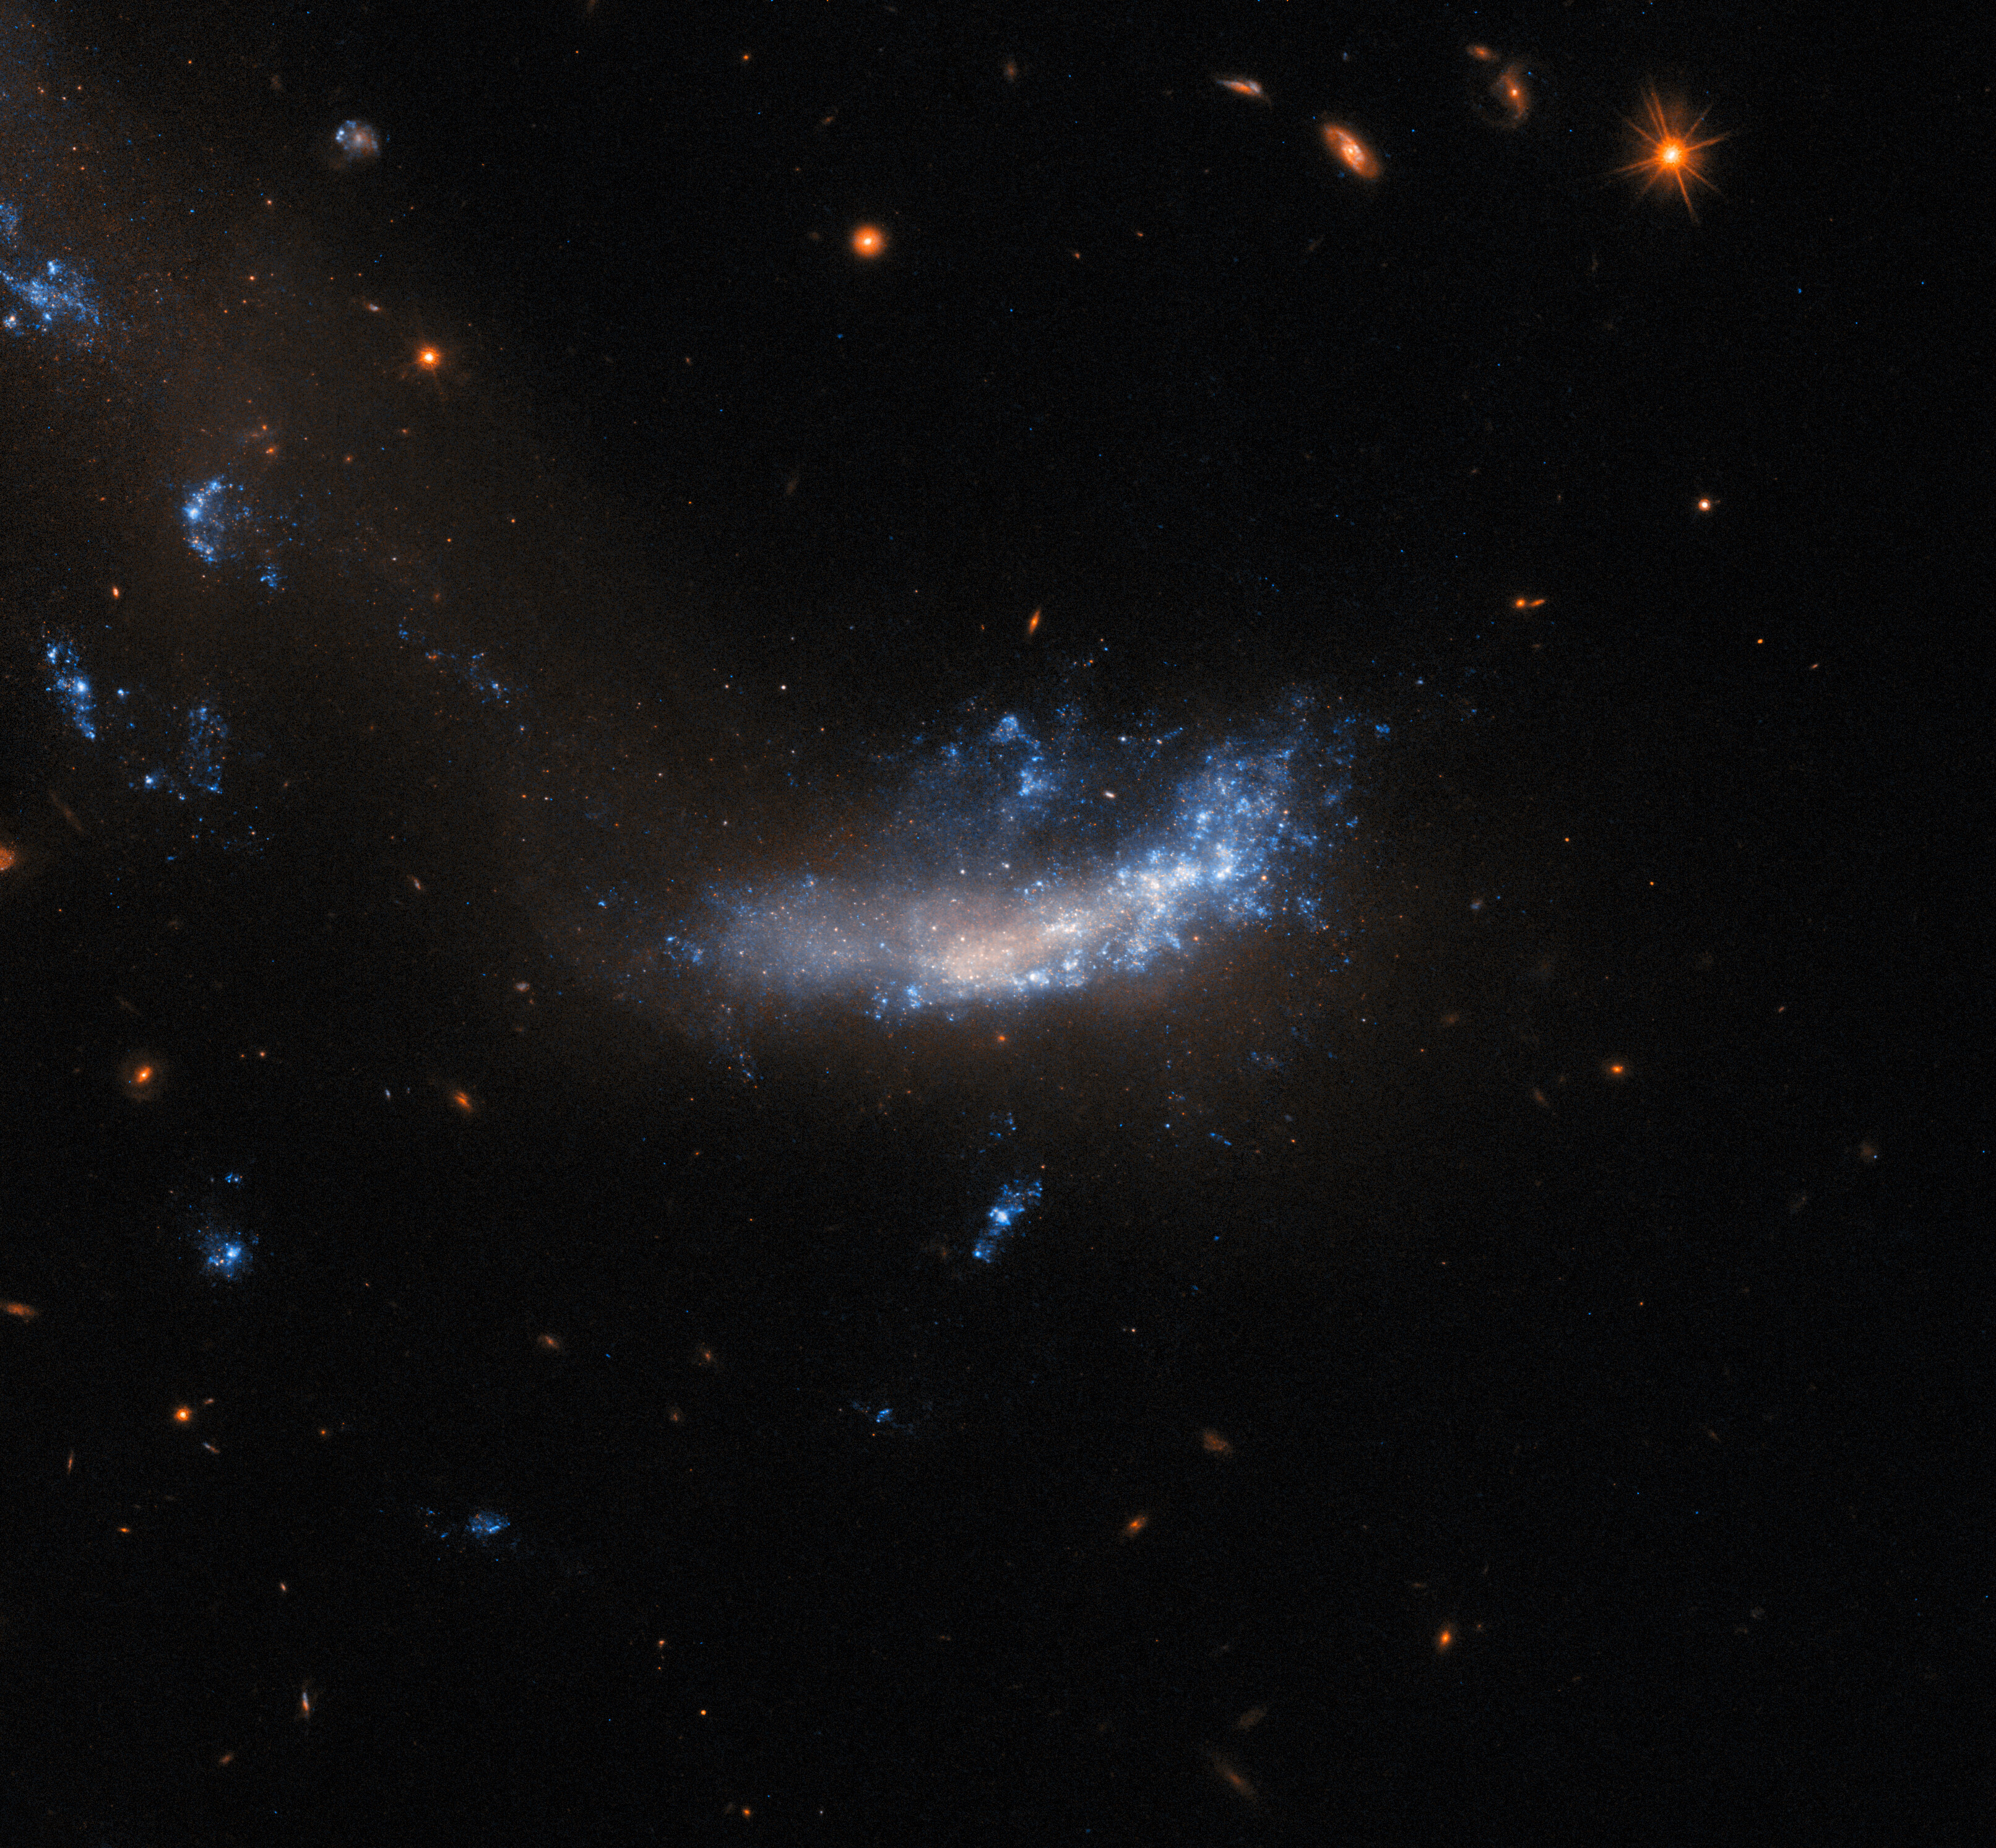 A galaxy that is flat and misshapen. Above and on its right side are plumes of shining gas and dust, while its center and left side are dimmer and patchier. A trail of dark, dim dust stretches from below the galaxy up and off to the left, where there are three more bright patches. The background around the galaxy is quite dark. It holds a few small background galaxies and one bright, foreground star.